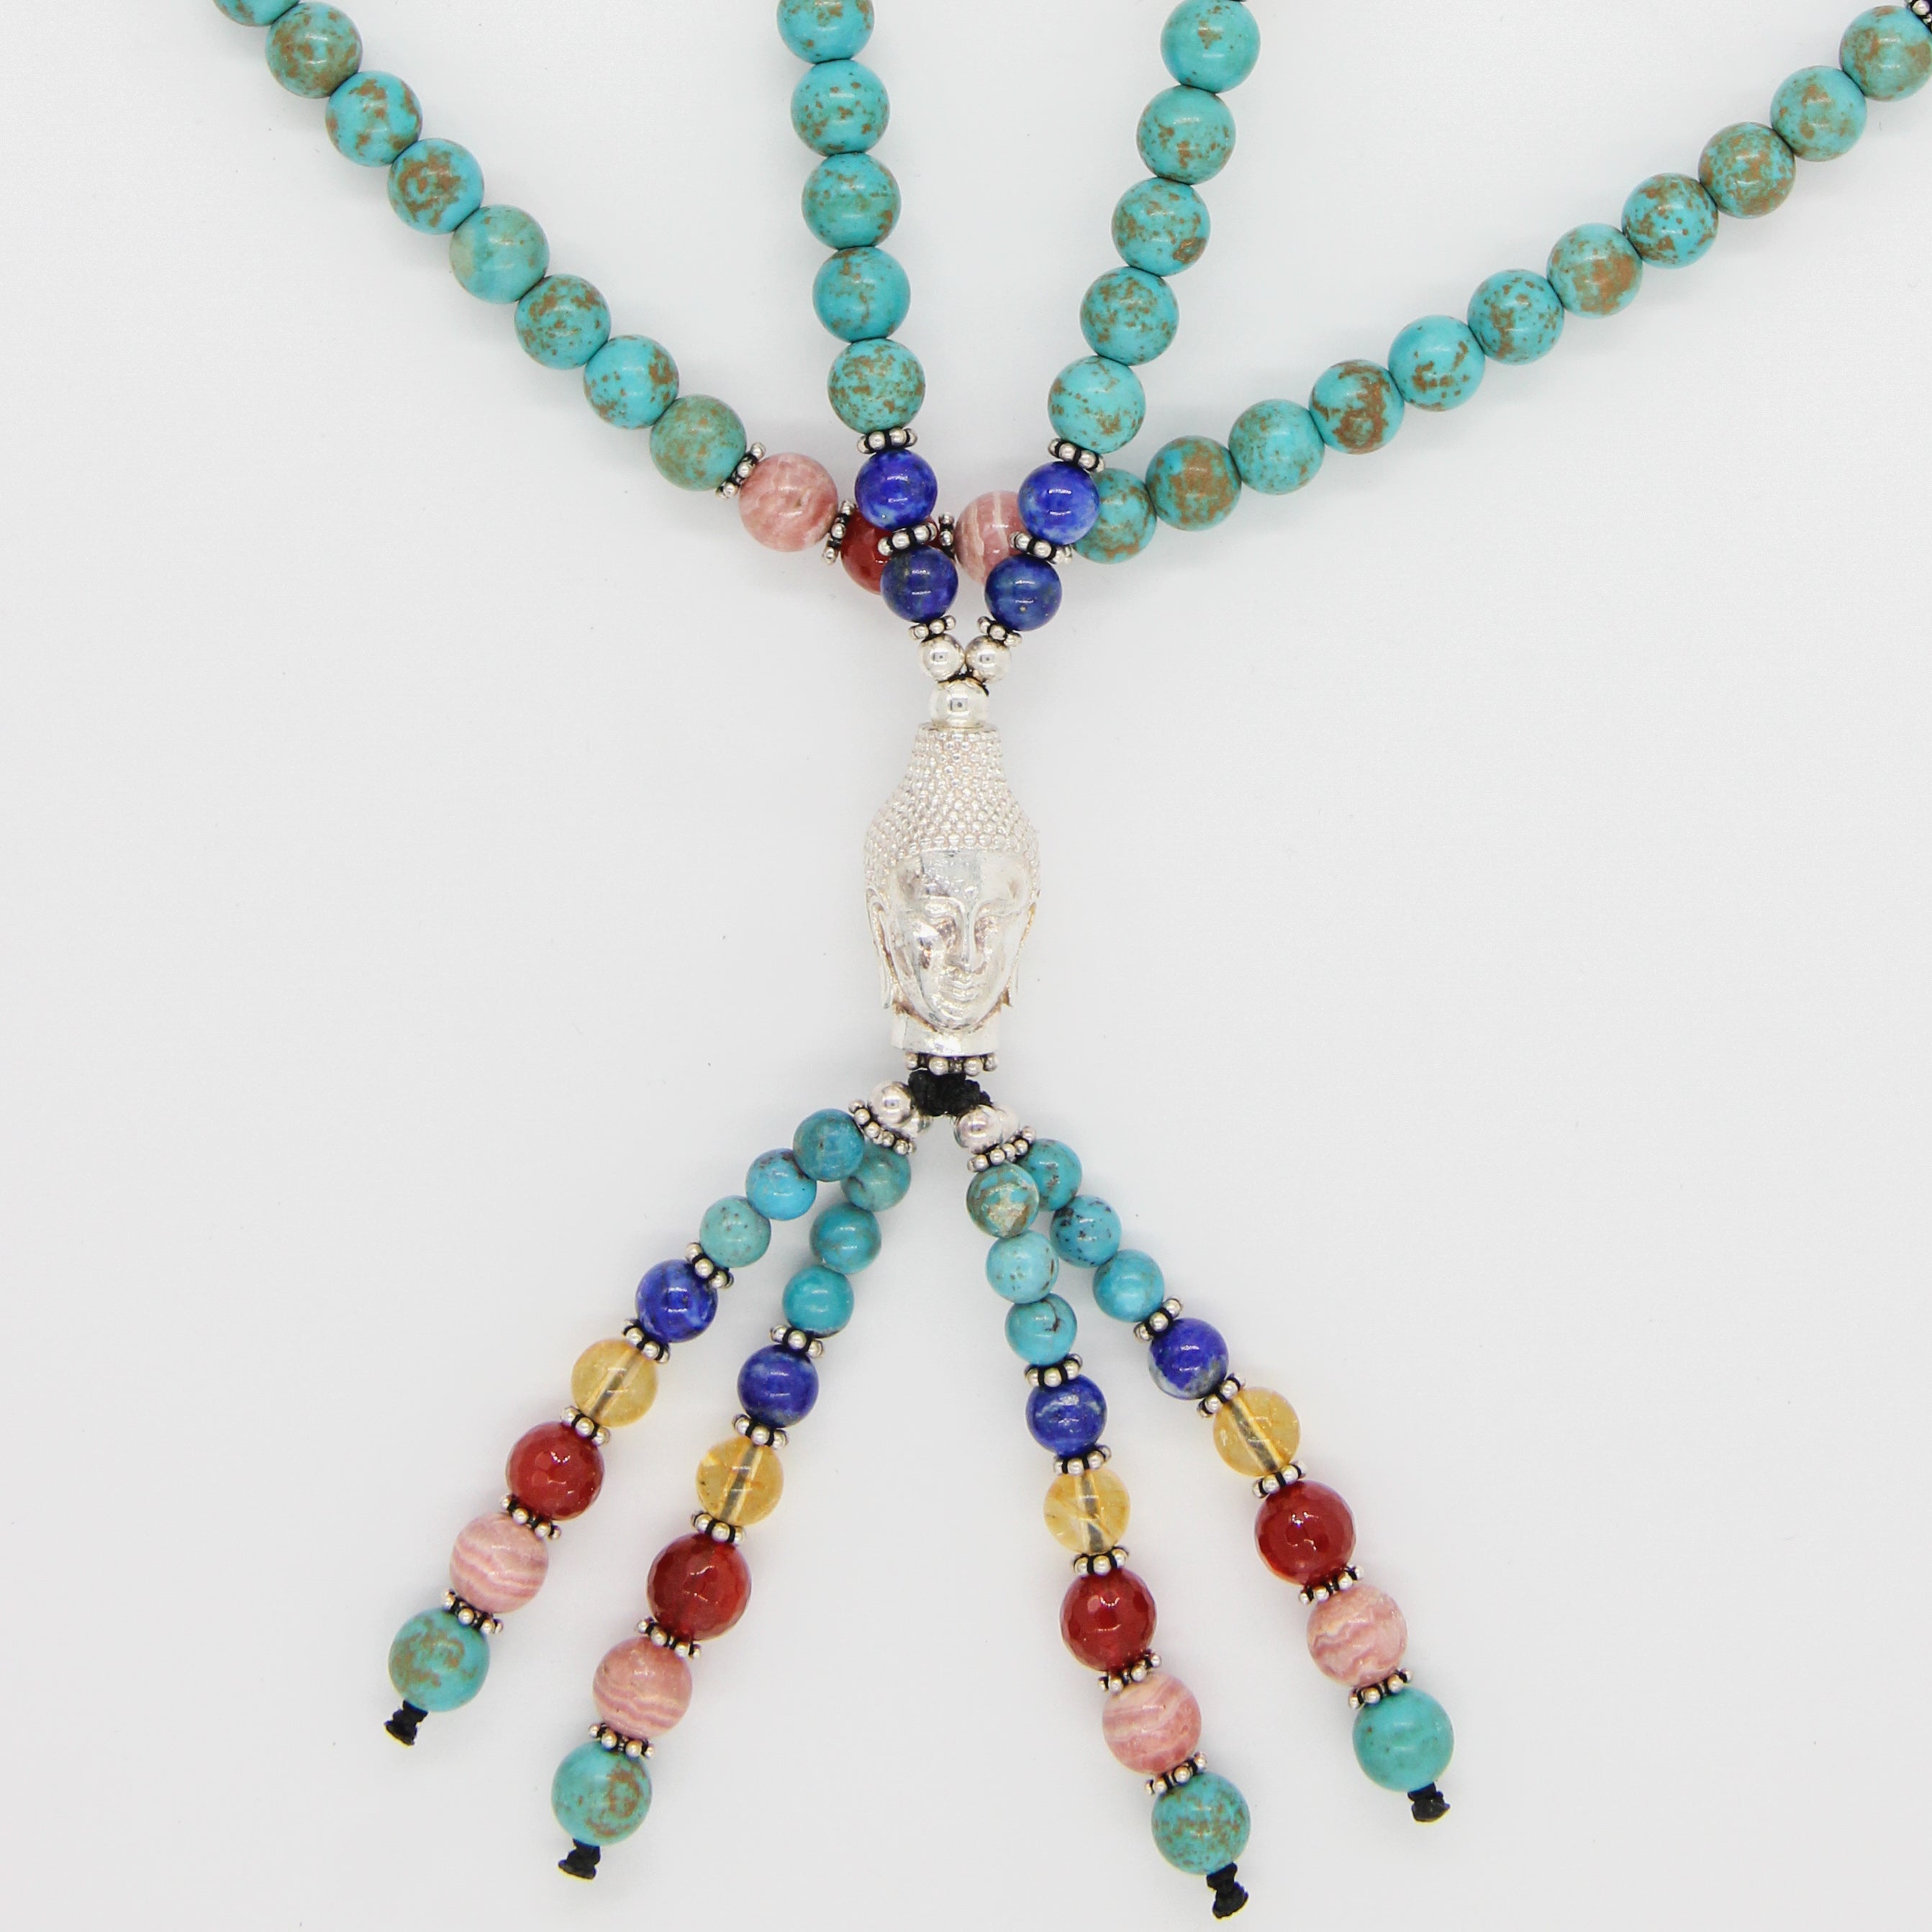 Turquoise Bead Necklace with Silver Buddha Head, Rhodochrosite, Carnelian, Citrine, Kyanite, Lapis Lazuli and Silver Beads